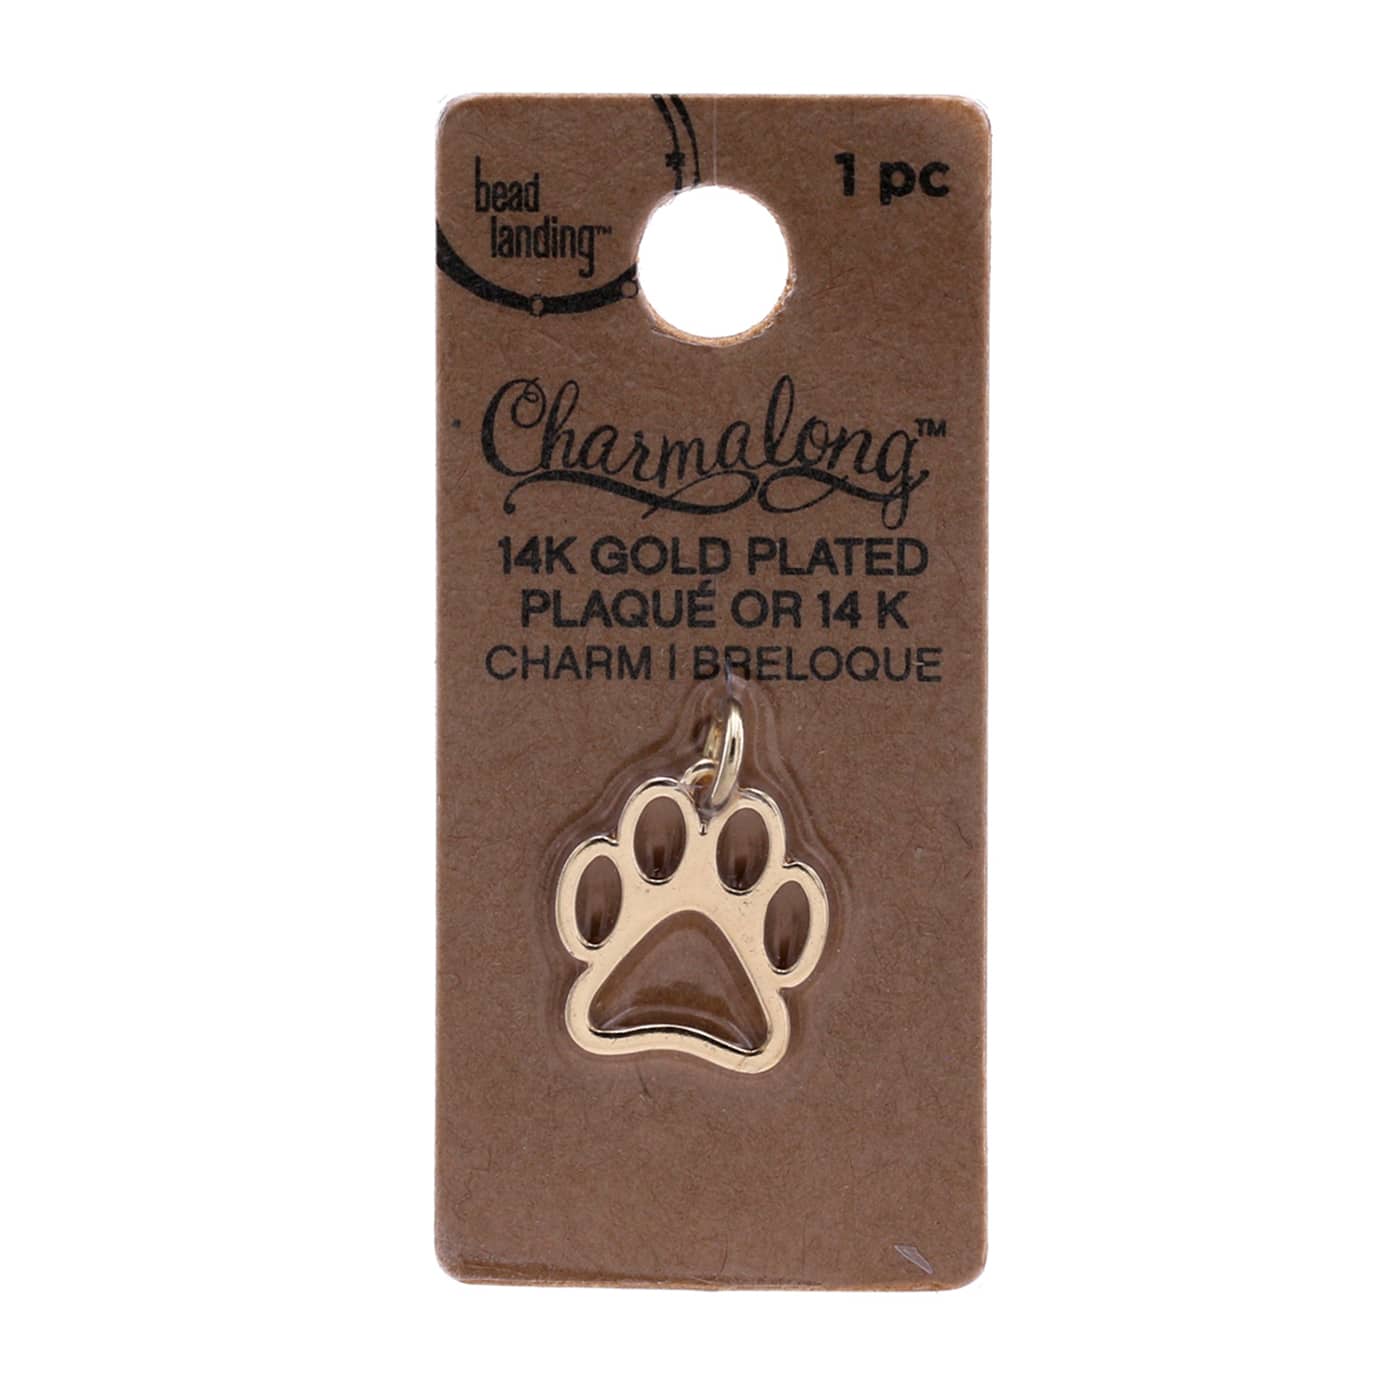 Charmalong™ 14K Gold Plated Paw Charm by Bead Landing™